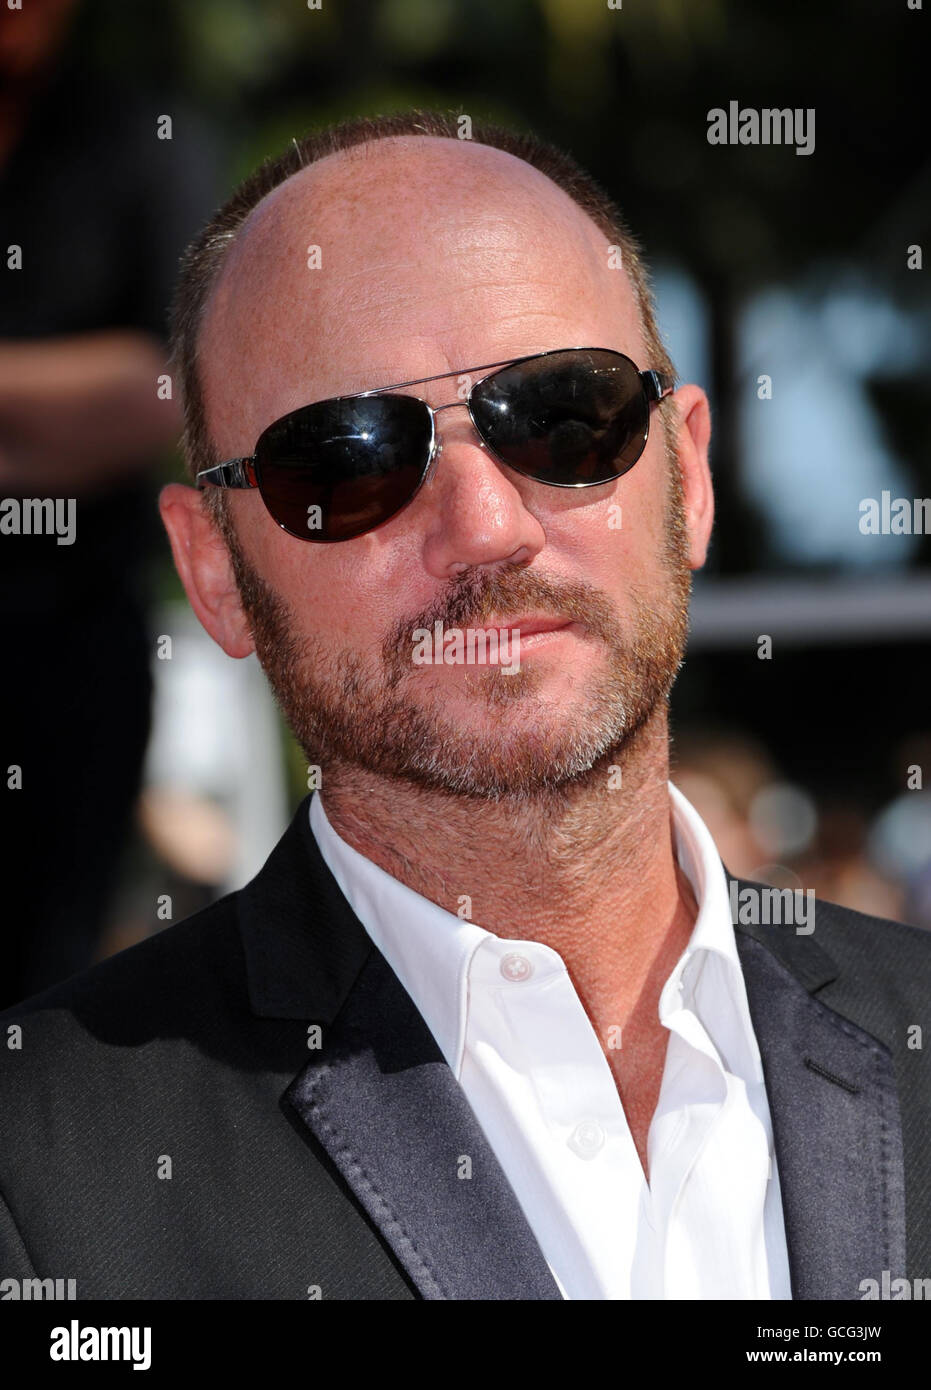 Actor Mark Womack attends the premiere of Ken Loach's Route Irish in which he stars, during the 63rd Cannes Film Festival, France. The film is a late entry for the Palme D'Or. Stock Photo